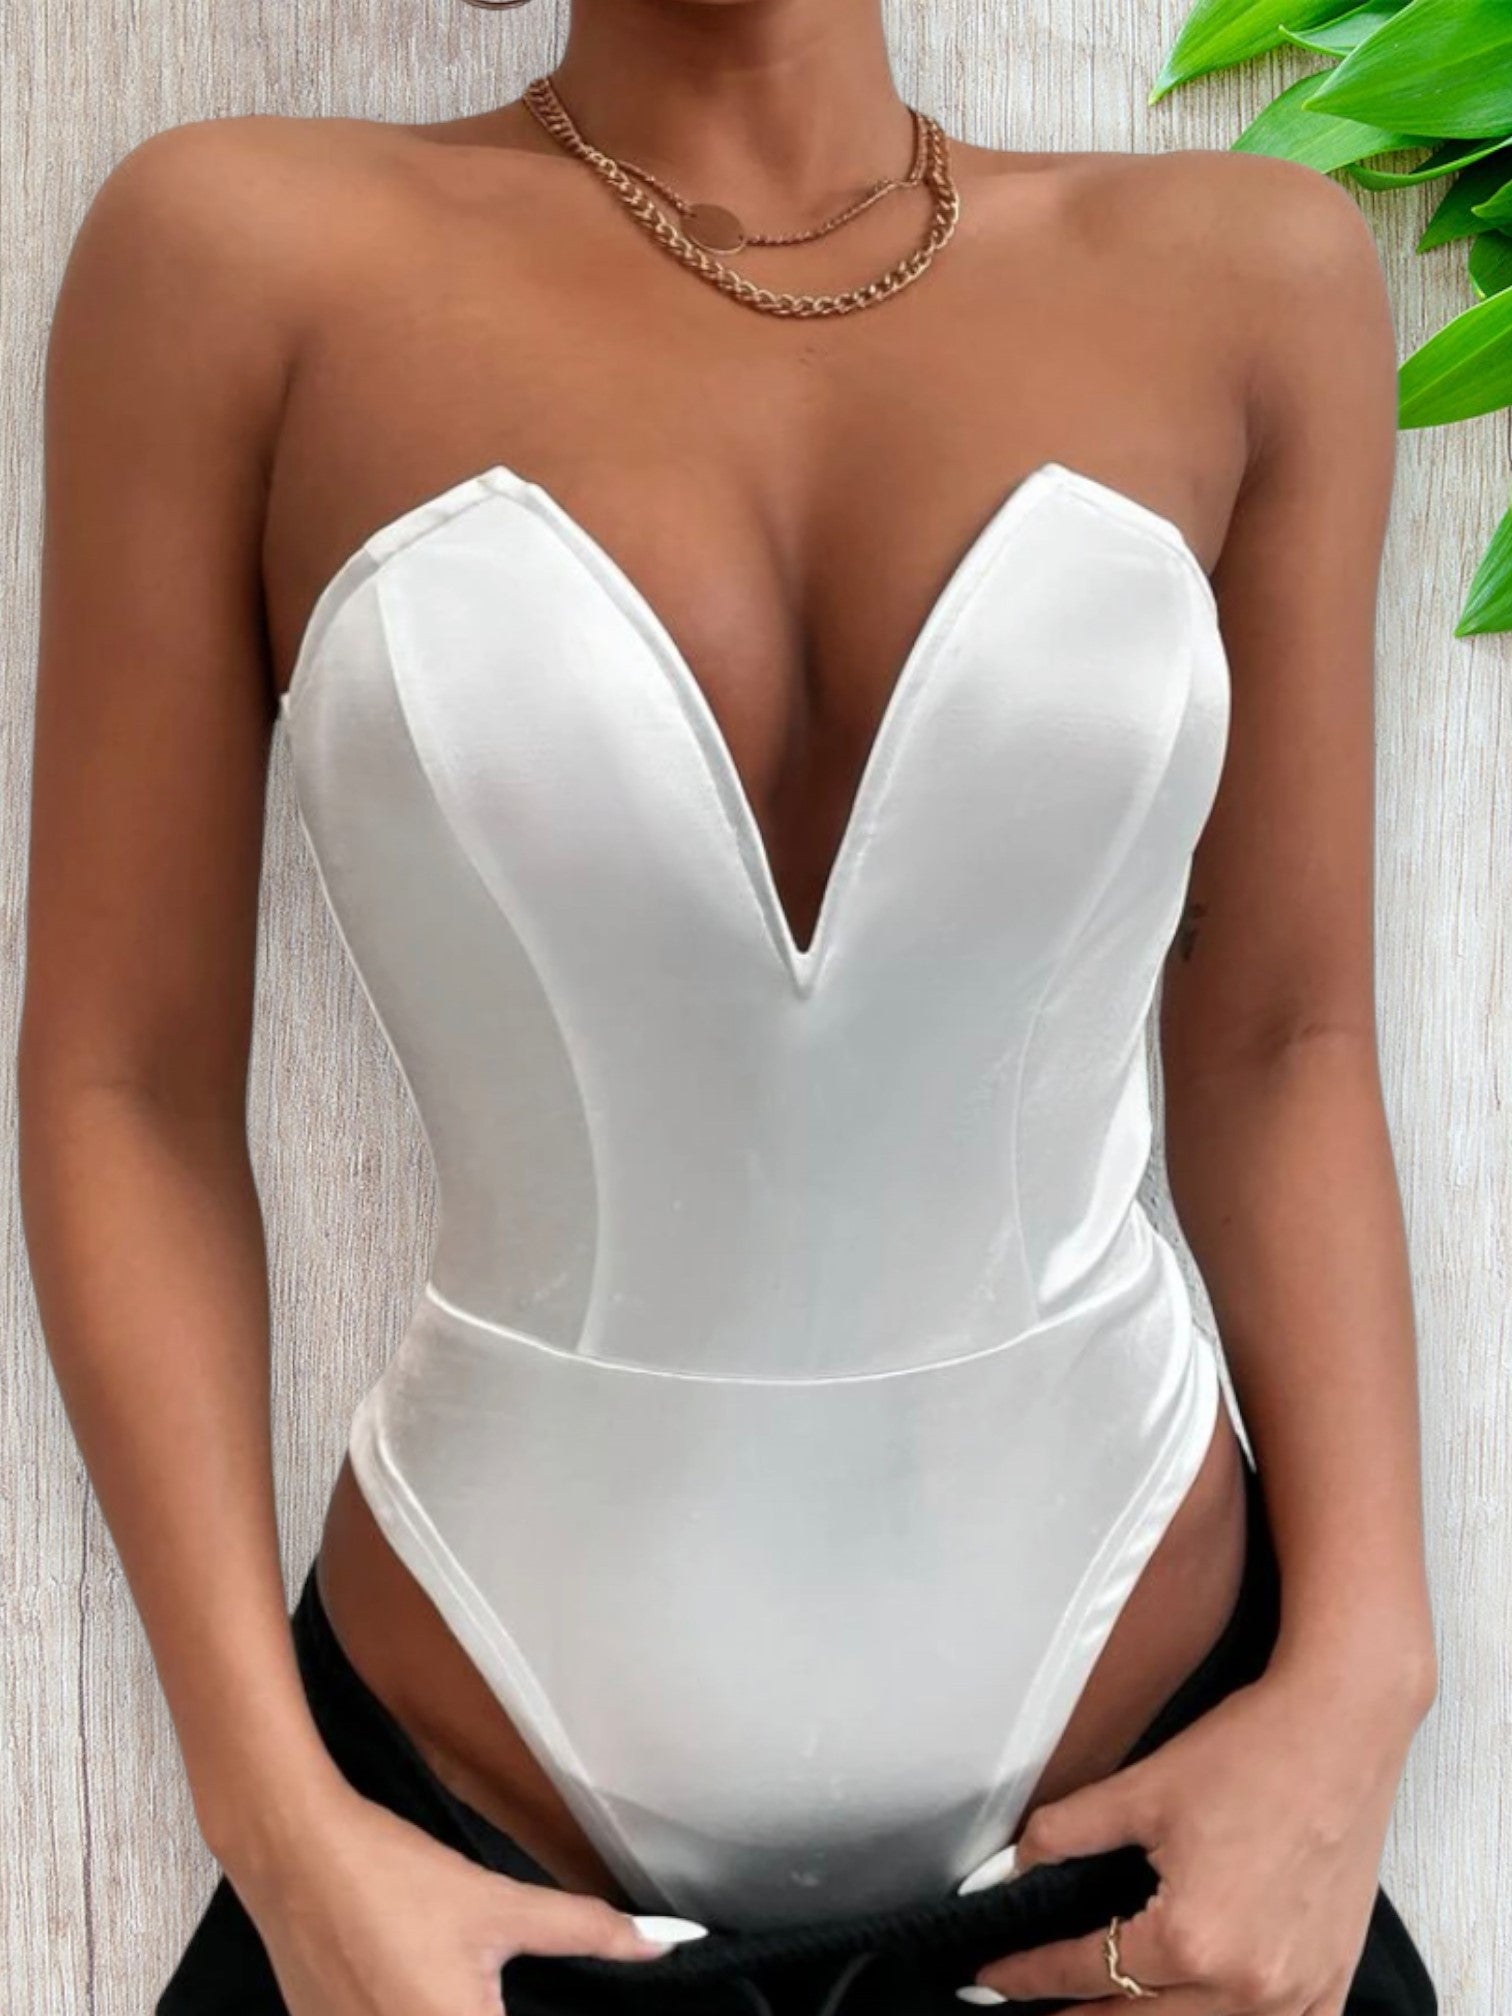 Your Such A Sweetheart Tube Top Bodysuit